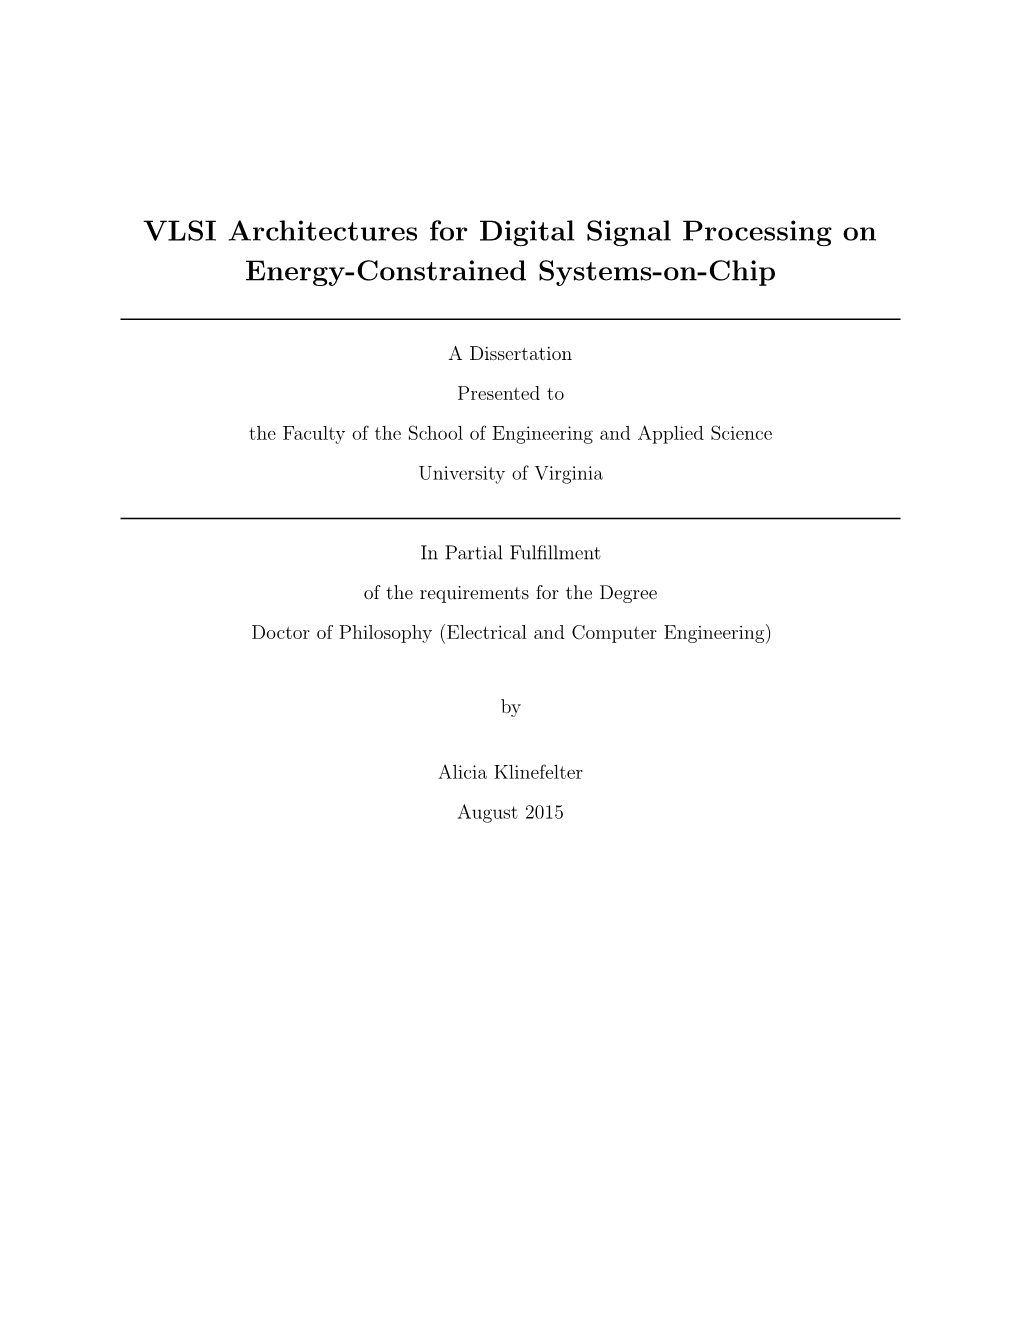 VLSI Architectures for Digital Signal Processing on Energy-Constrained Systems-On-Chip